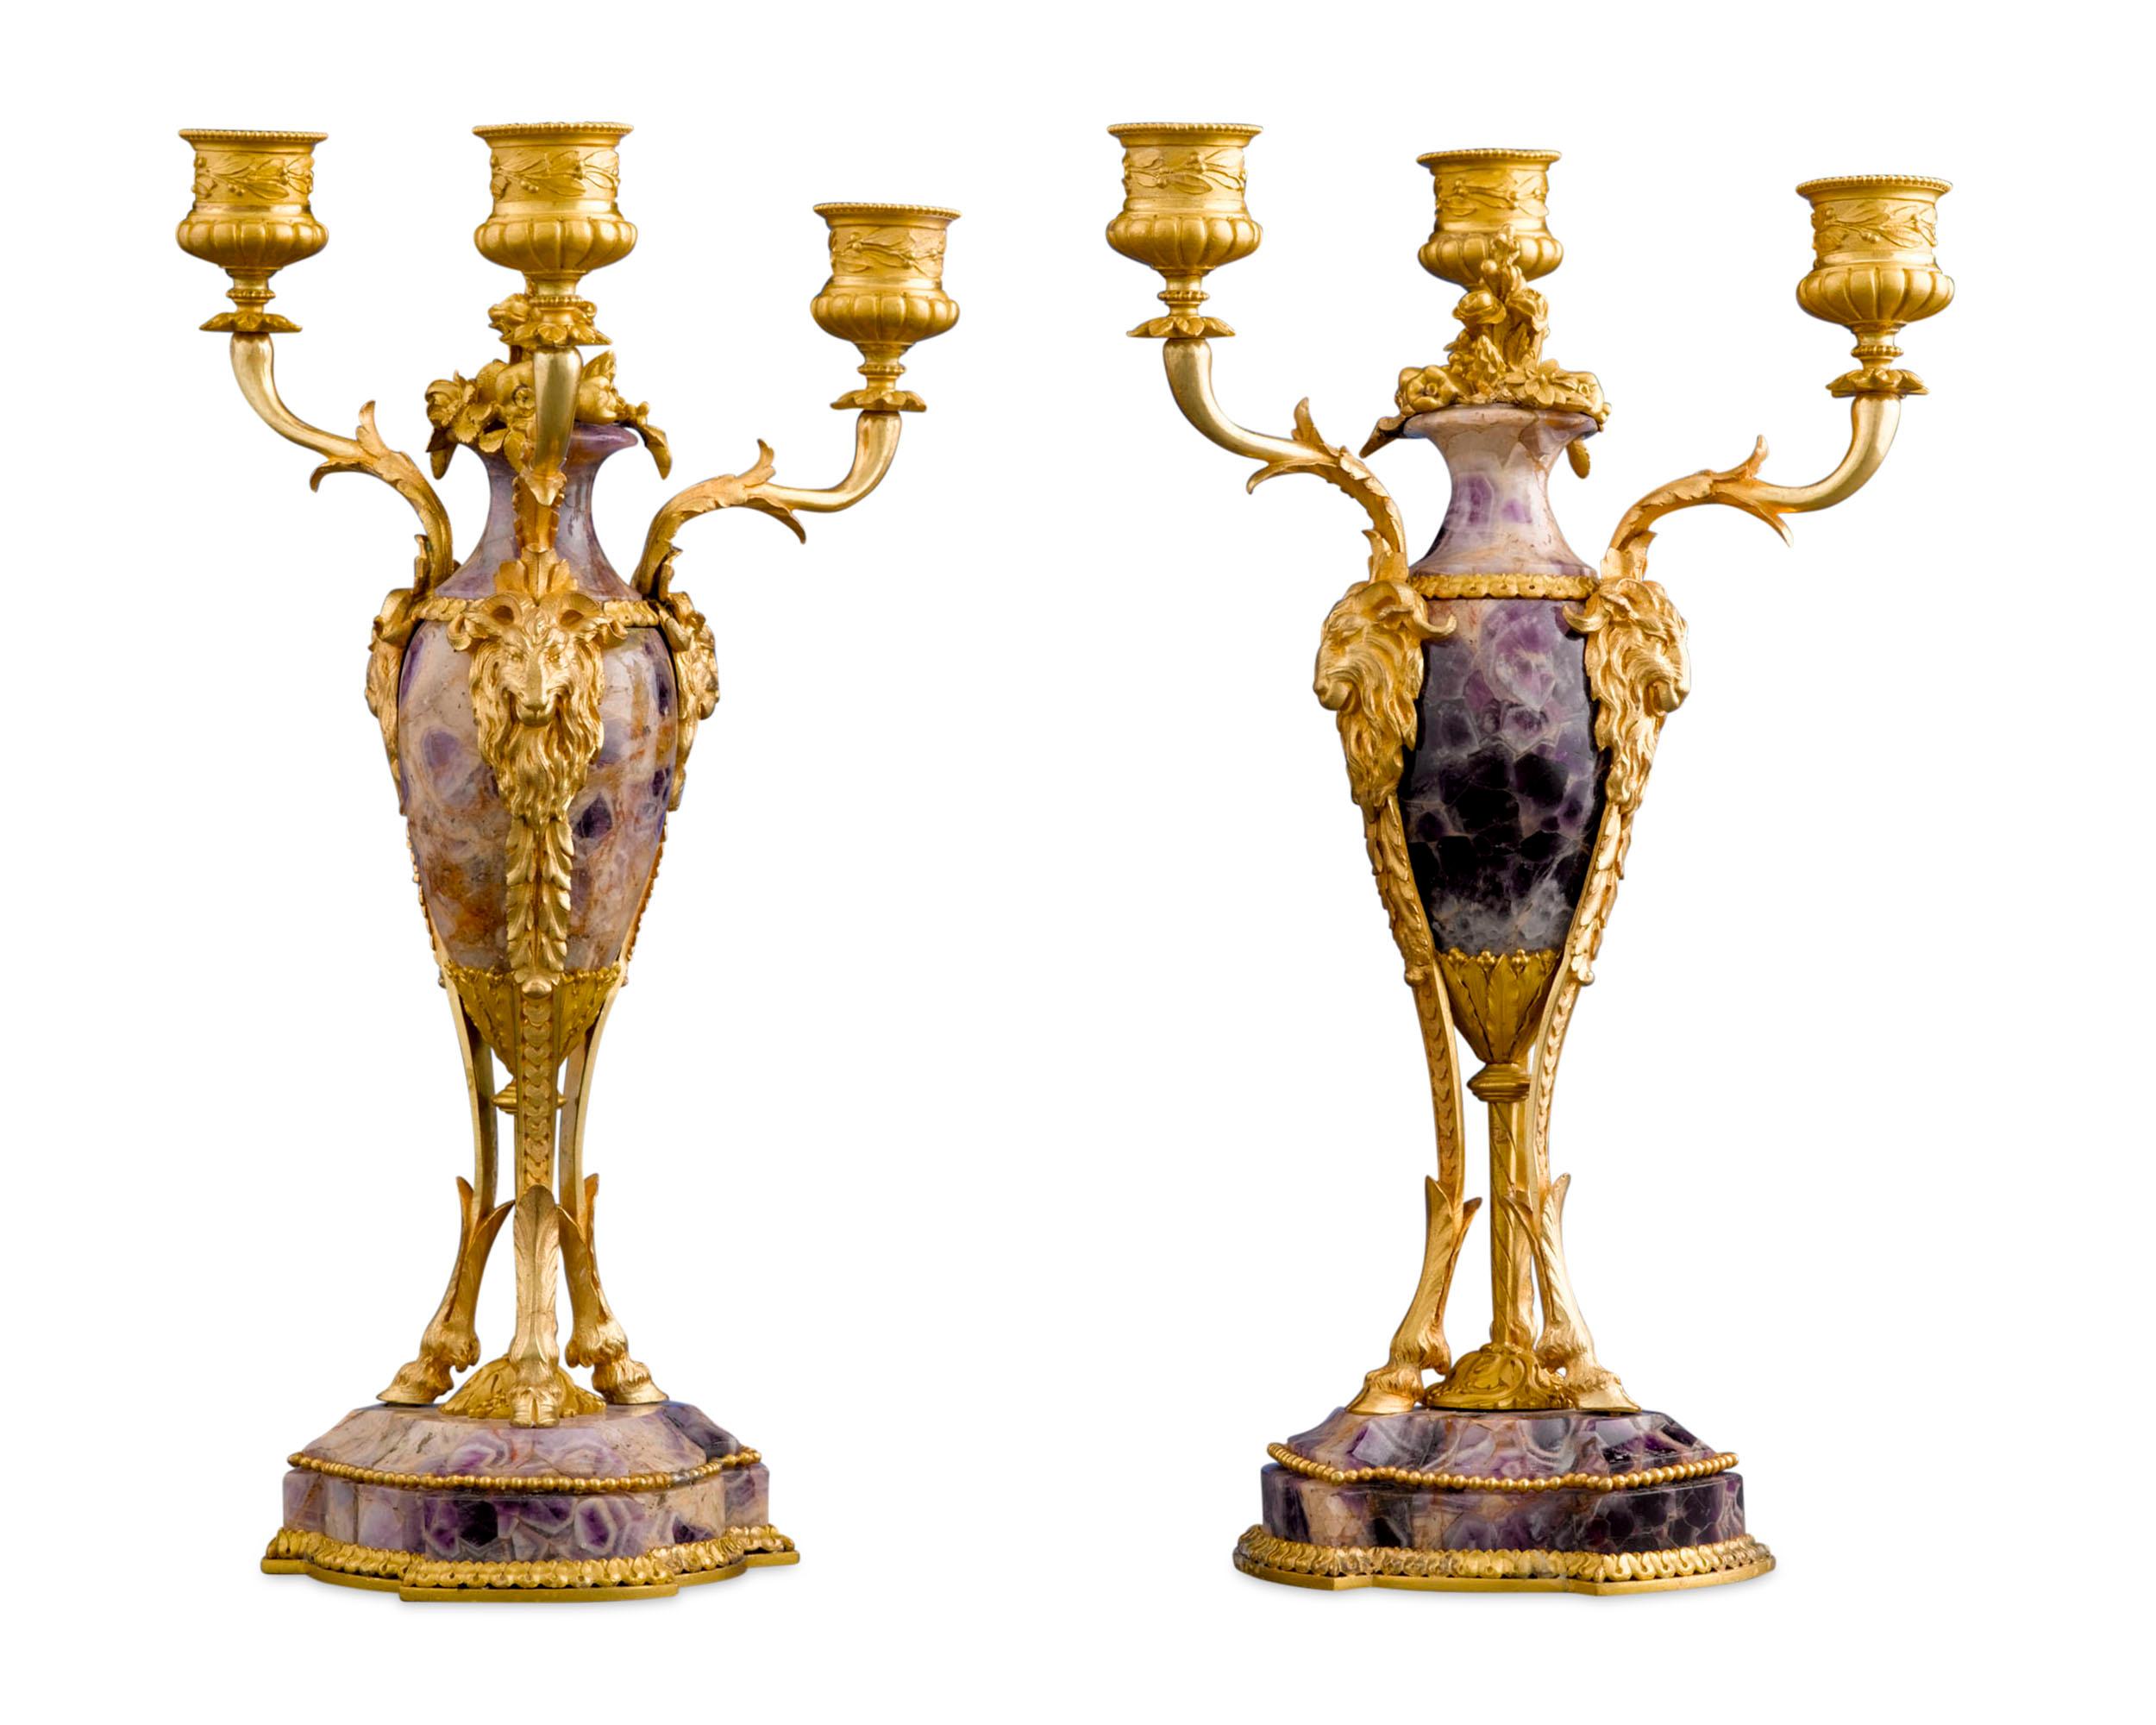 In these dazzling candelabra, beautiful amethyst is complemented by high-caliber ormolu mounts. The central body and pedestal of each are hewn from the desired purple gemstone are elegantly adorned with autumnal ornaments such as ram's head